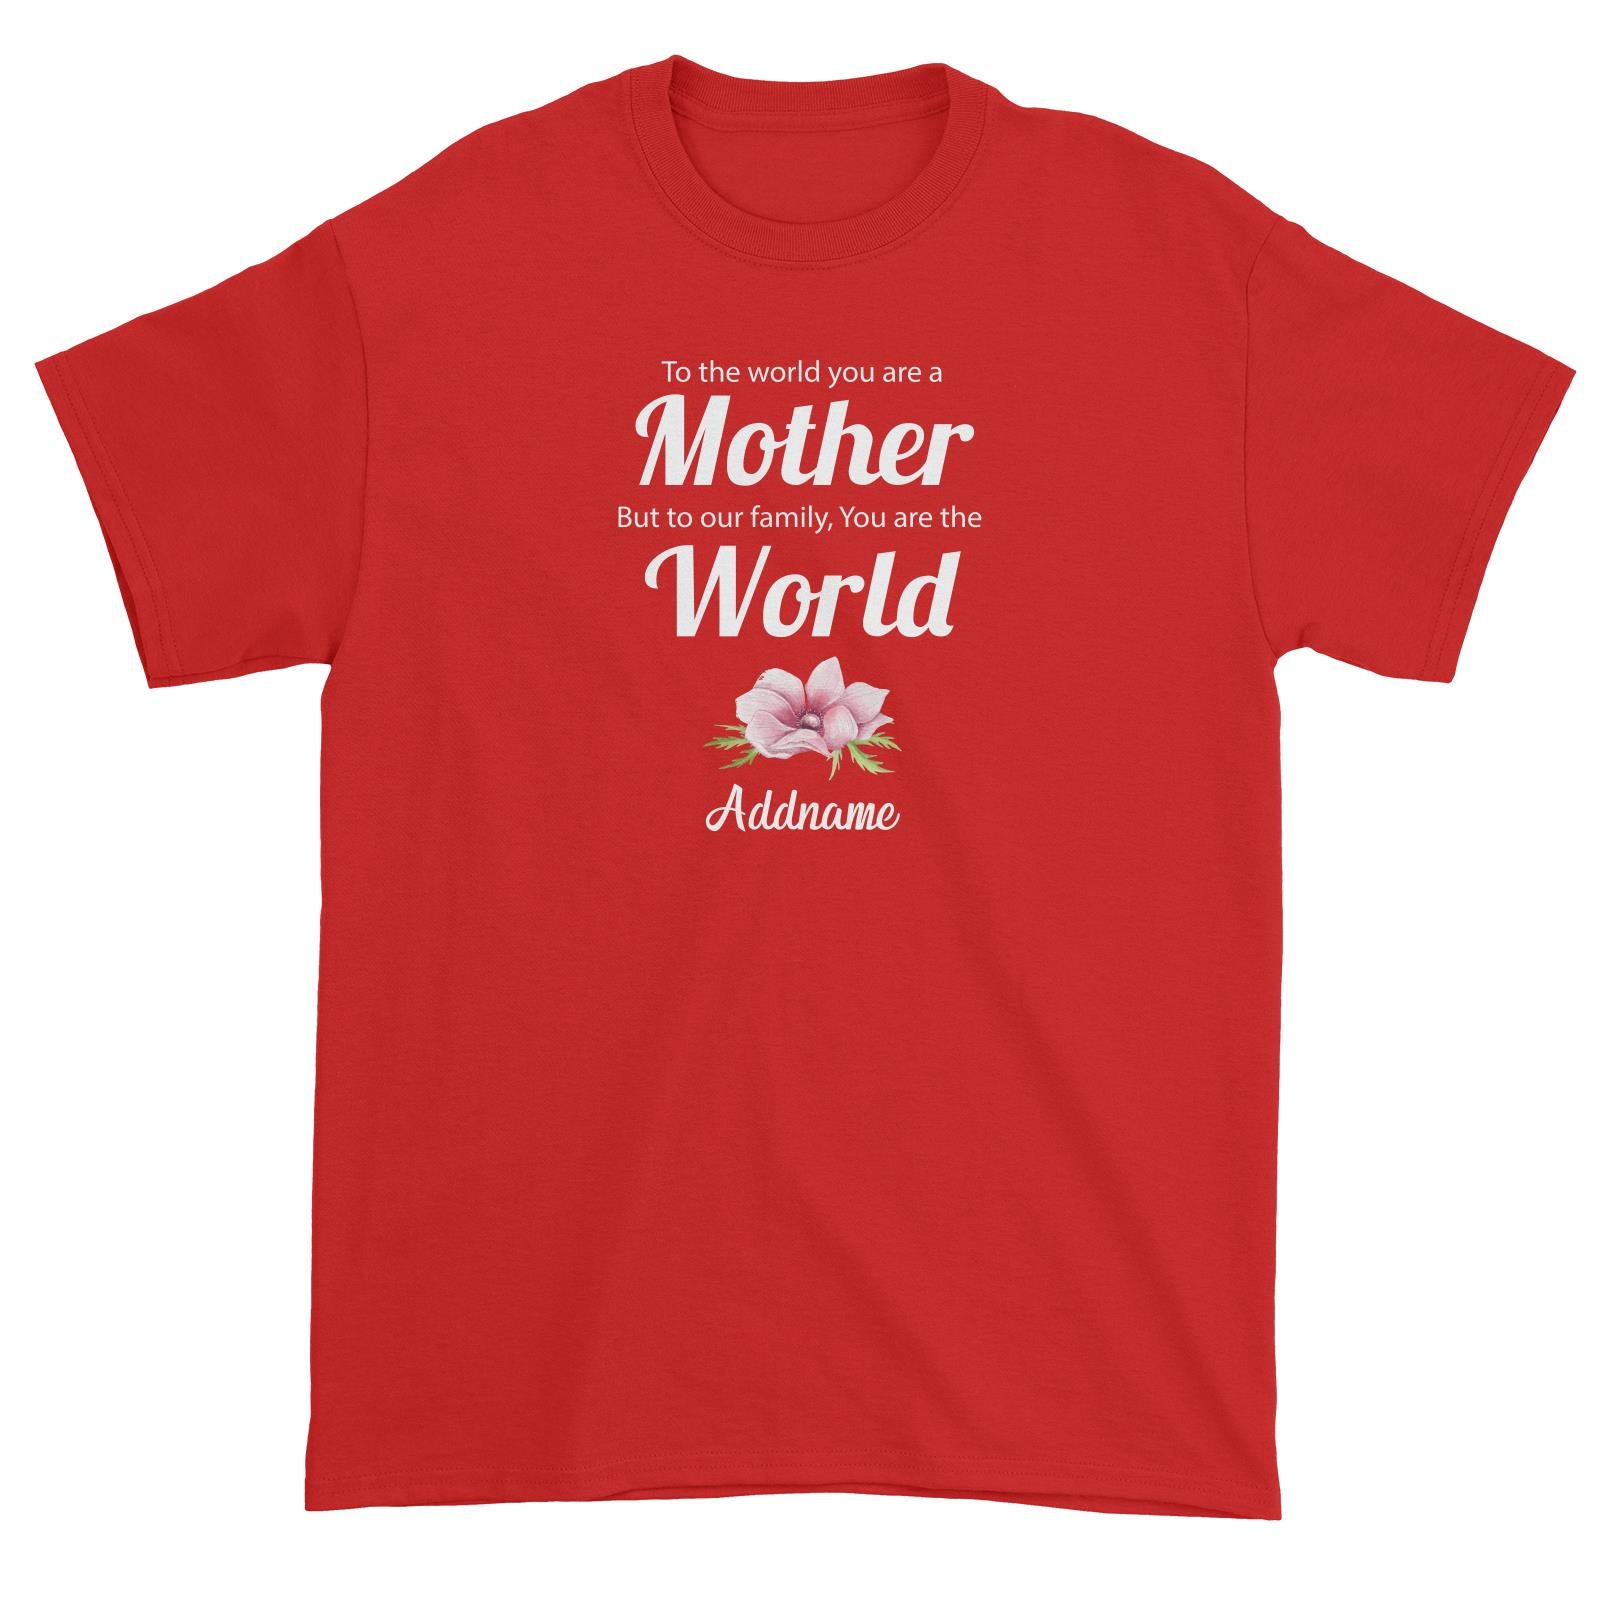 Sweet Mom Quotes 1 To The World You Are A Mother But To Our Family, You Are The World Addname Unisex T-Shirt